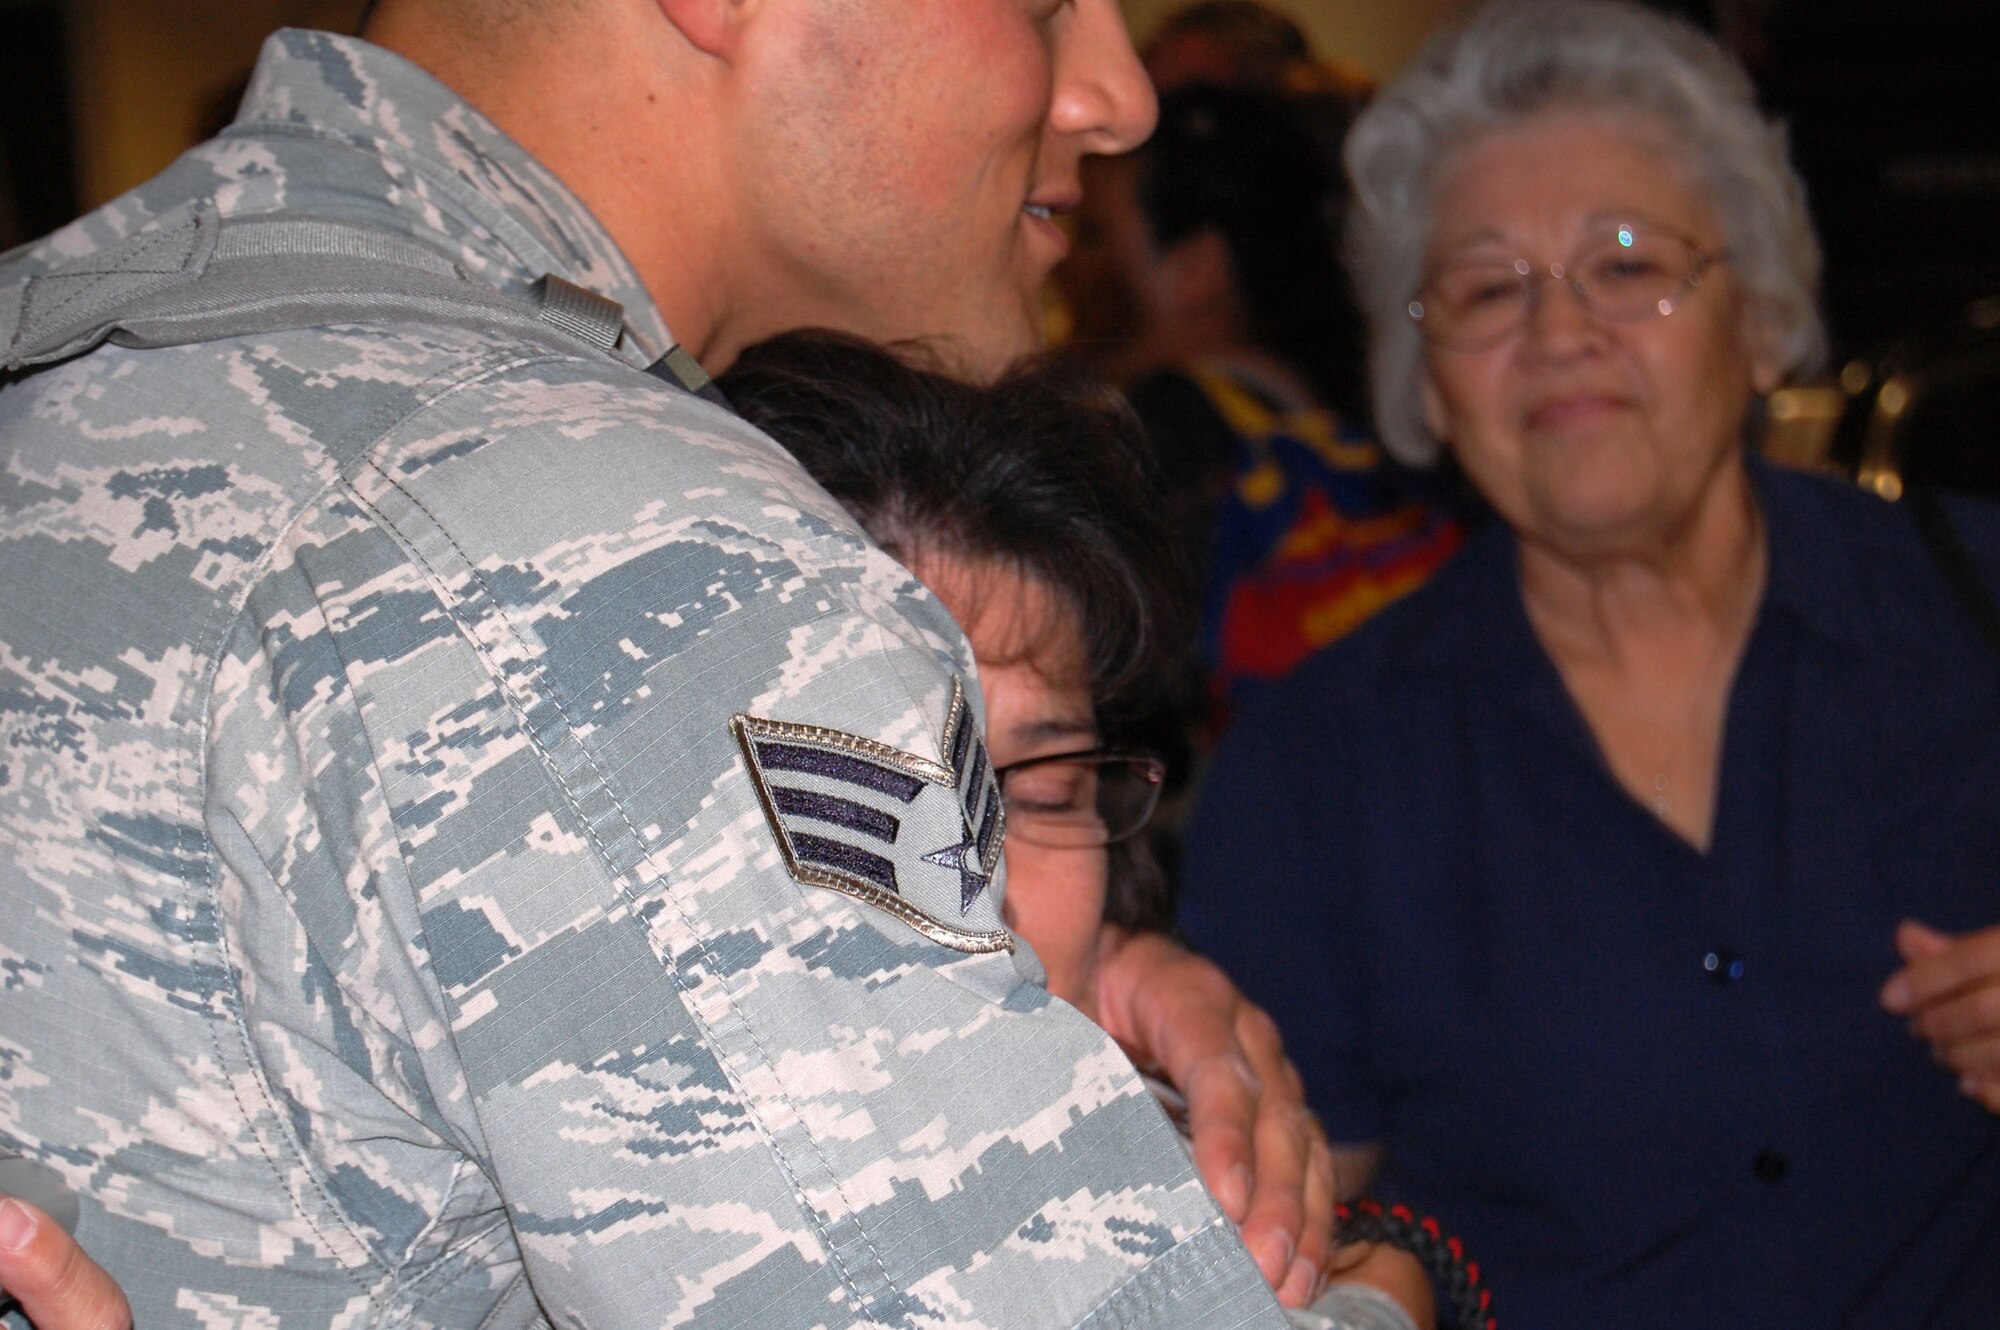 Senior Airman Frank Landavaso is greeted with a hug April 13 in the Tucson International Airport baggage claim. Landavaso and his fellow firefighters from the 162nd Fighter Wing spent the last six months deployed to Southwest Asia. (U.S. Air Force photo/Airman 1st Class Roberto Gonzalez)